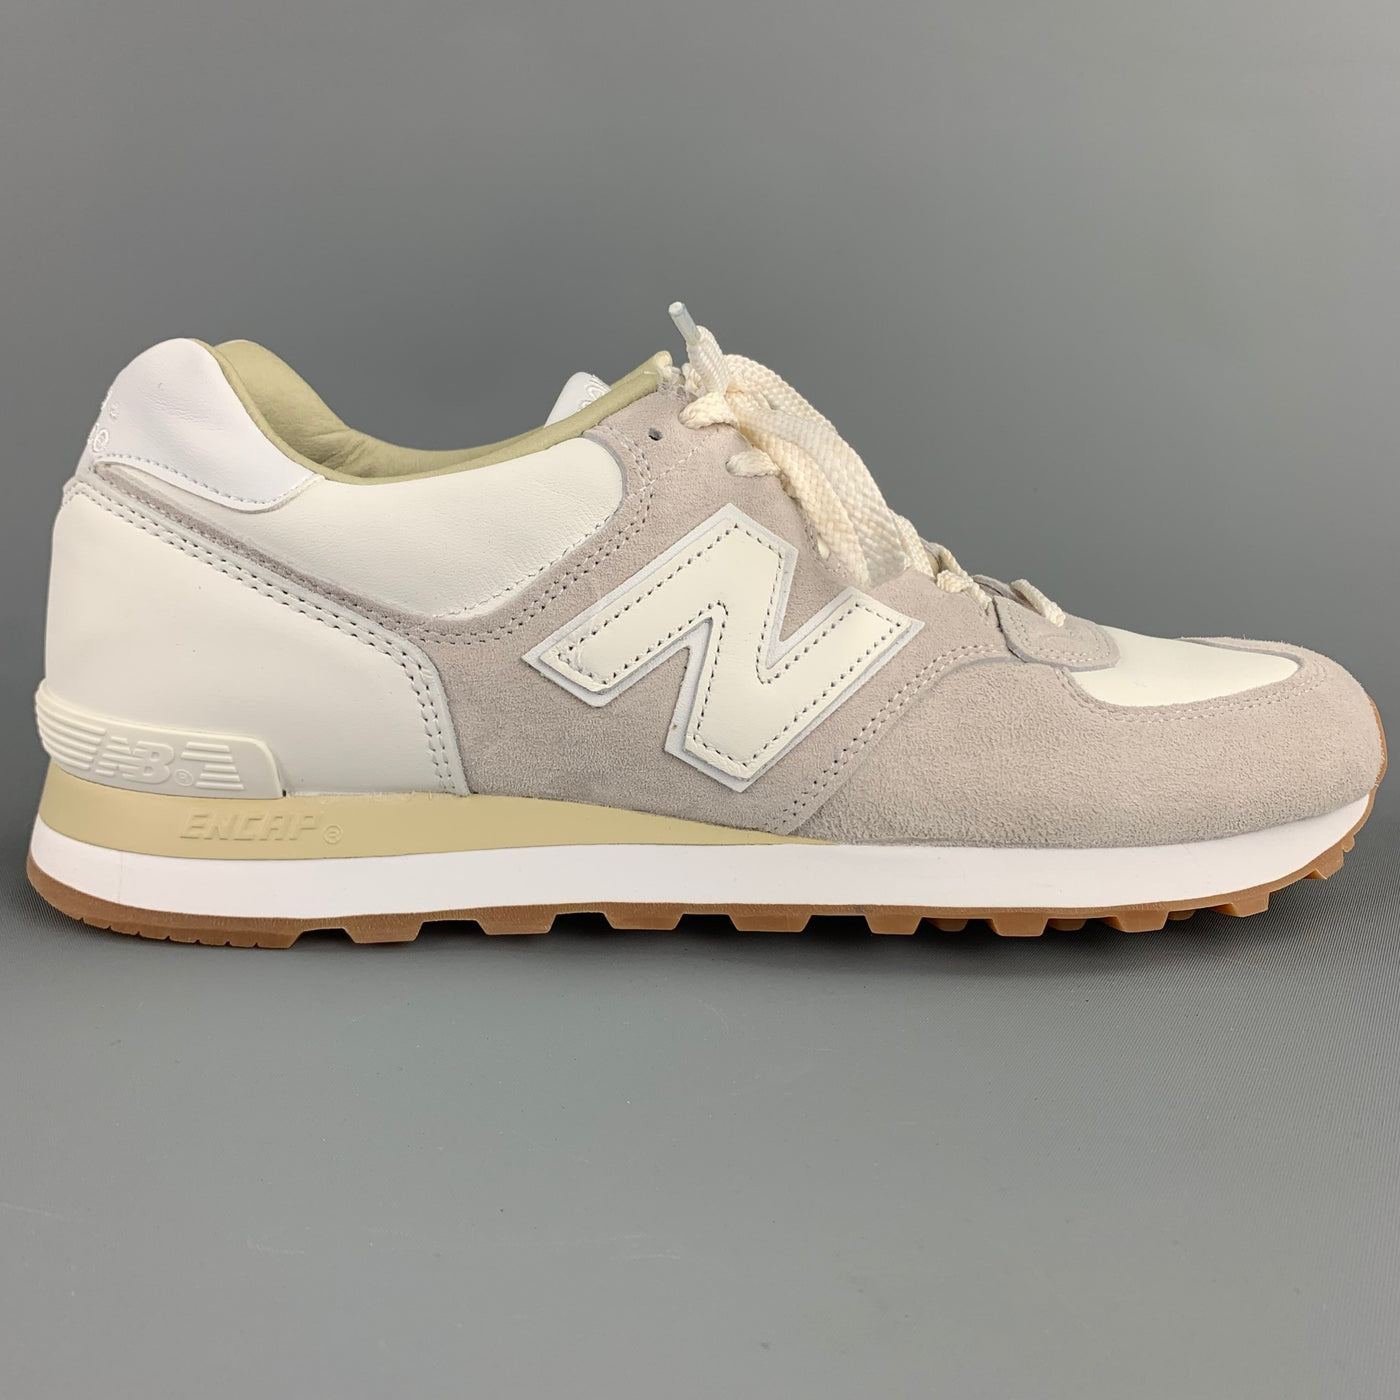 Colector Ser bandera nacional NEW BALANCE 575 Classic Size 10.5 White Two Toned Leather Grey Sneakers –  Sui Generis Designer Consignment